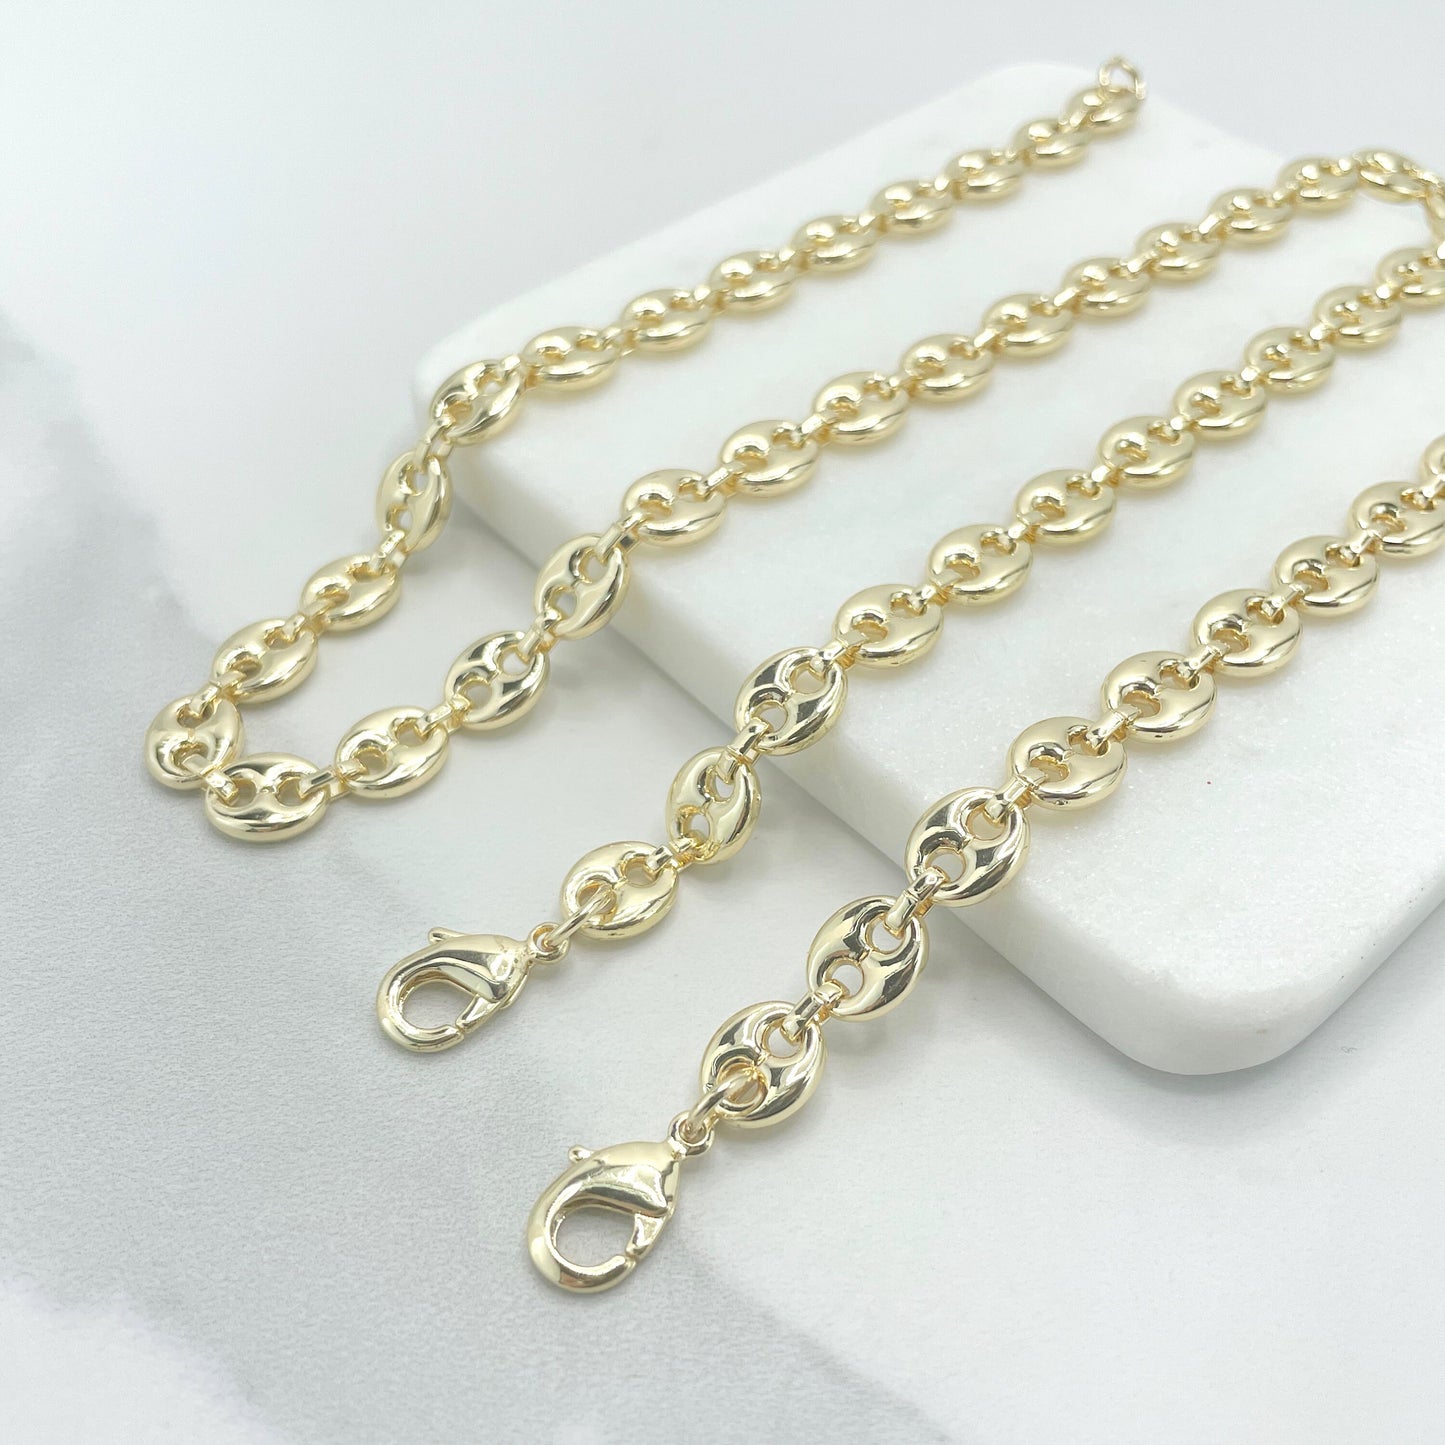 18k Gold Filled 12mm Puffy Mariner Style Link Chain, Necklace or Bracelet, Wholesale Jewelry Making Supplies